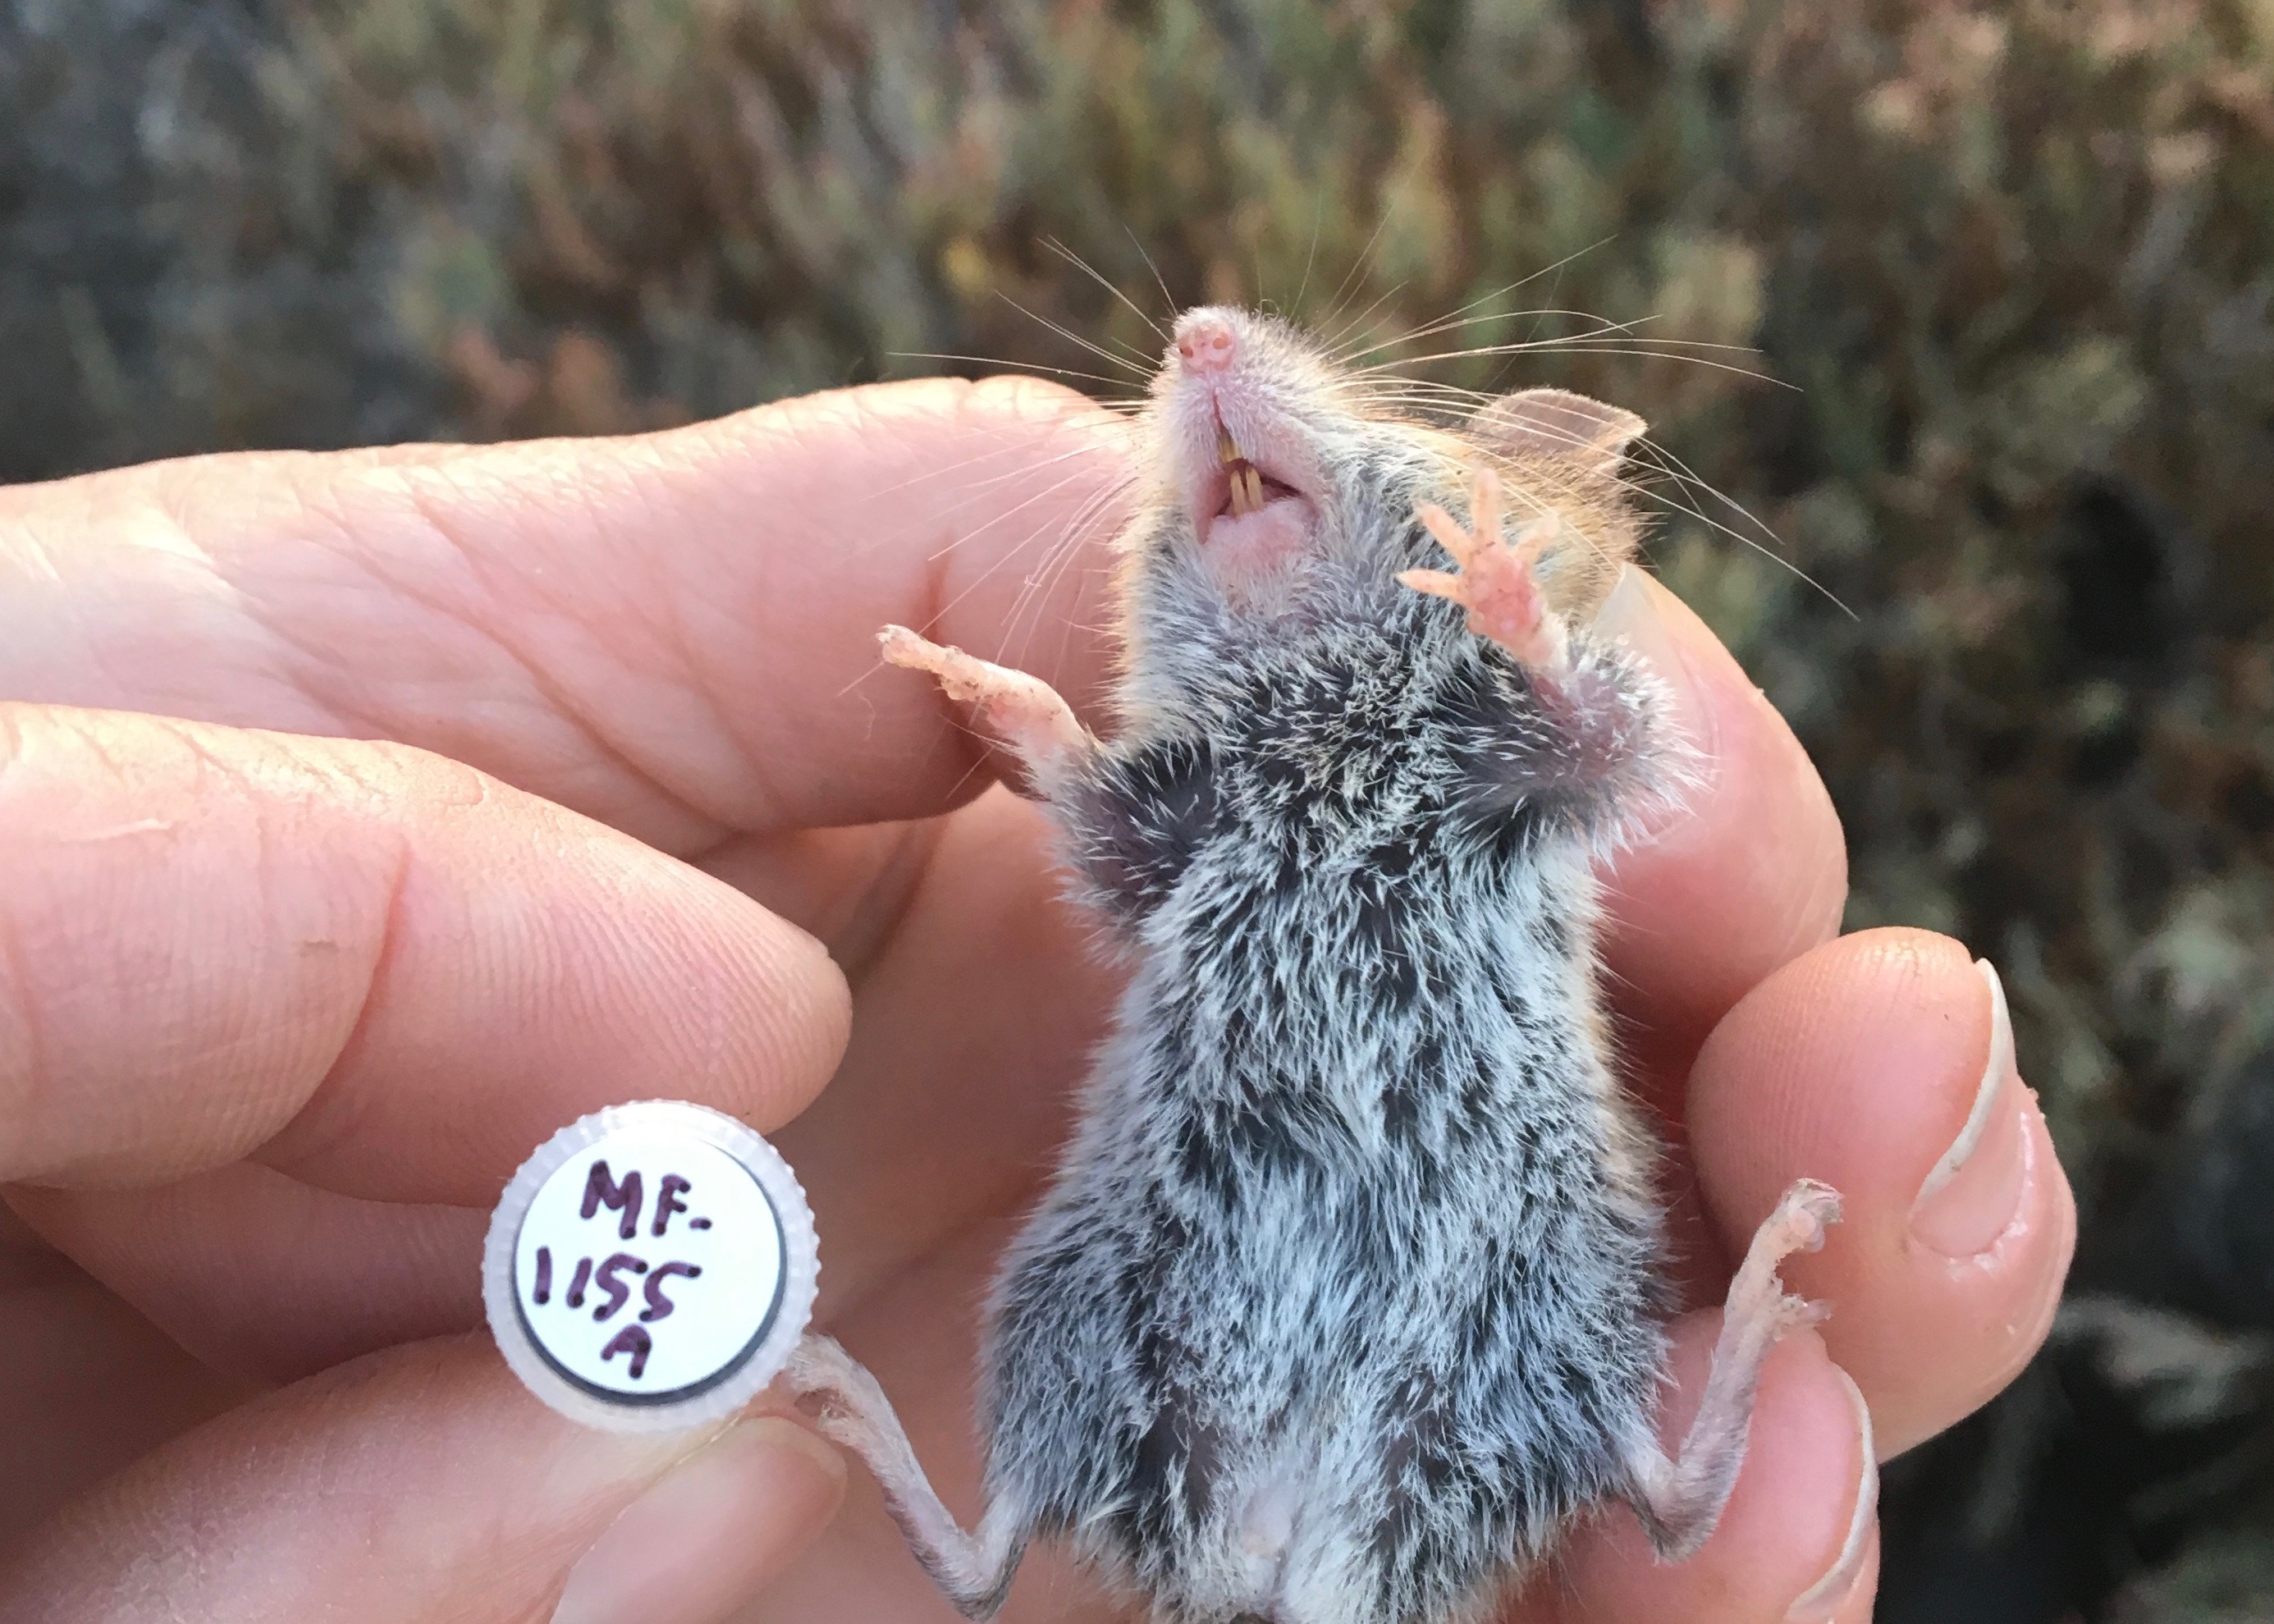 A live western harvest mouse is held by a field biologist as it is being identified.